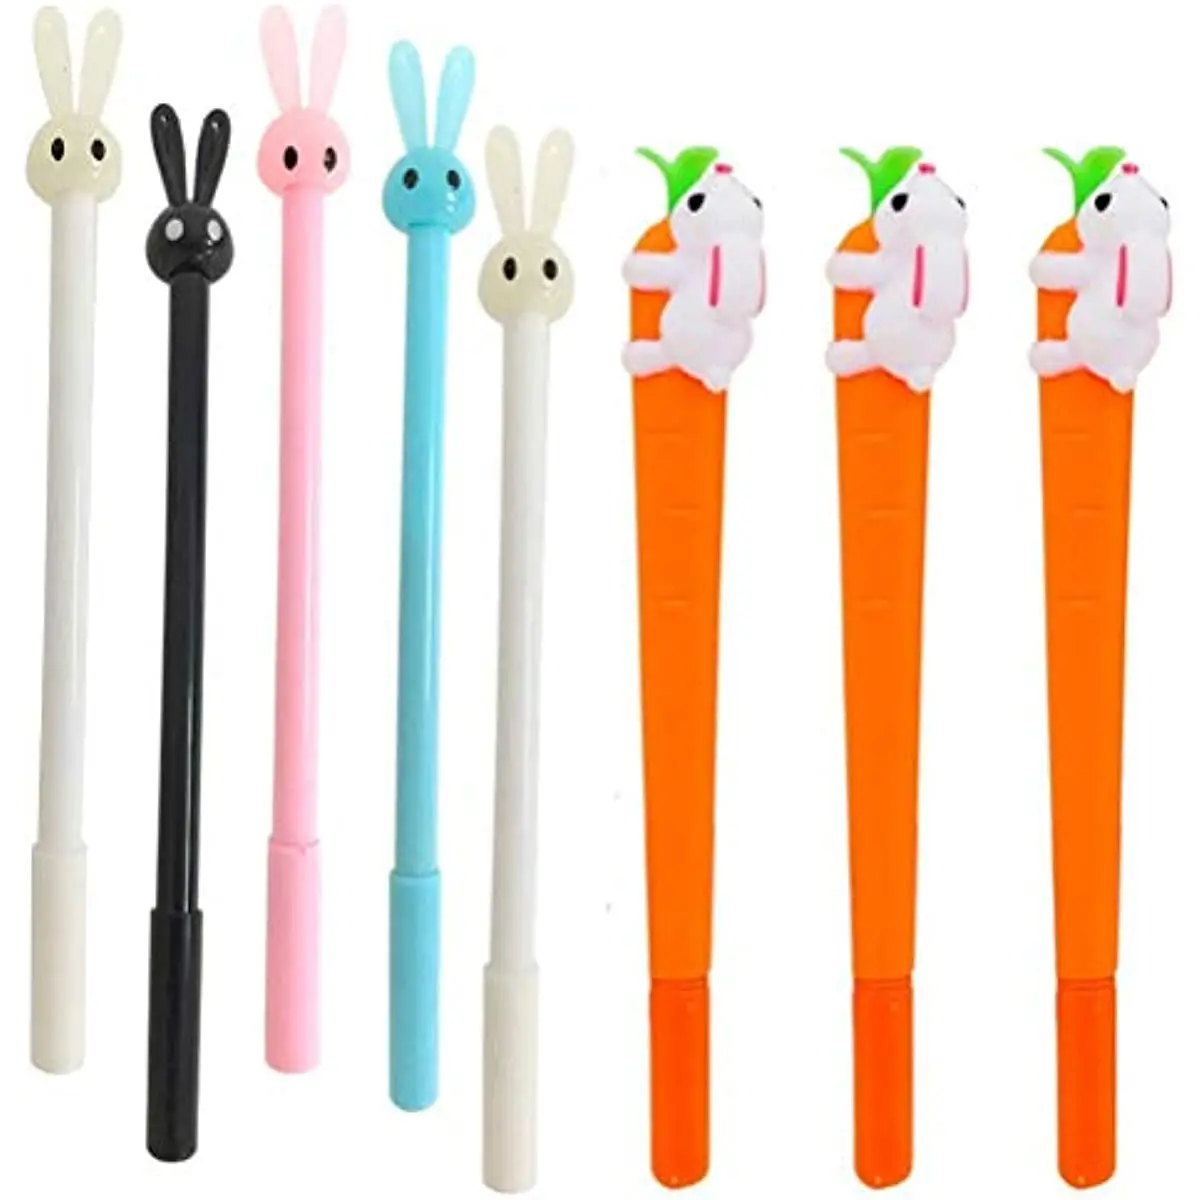 18 Pcs New Cute Bunny Rabbit Carrot Gel Ink Pens Black Ball Point Pens Creative Gifts for Office School Student Supplies Set